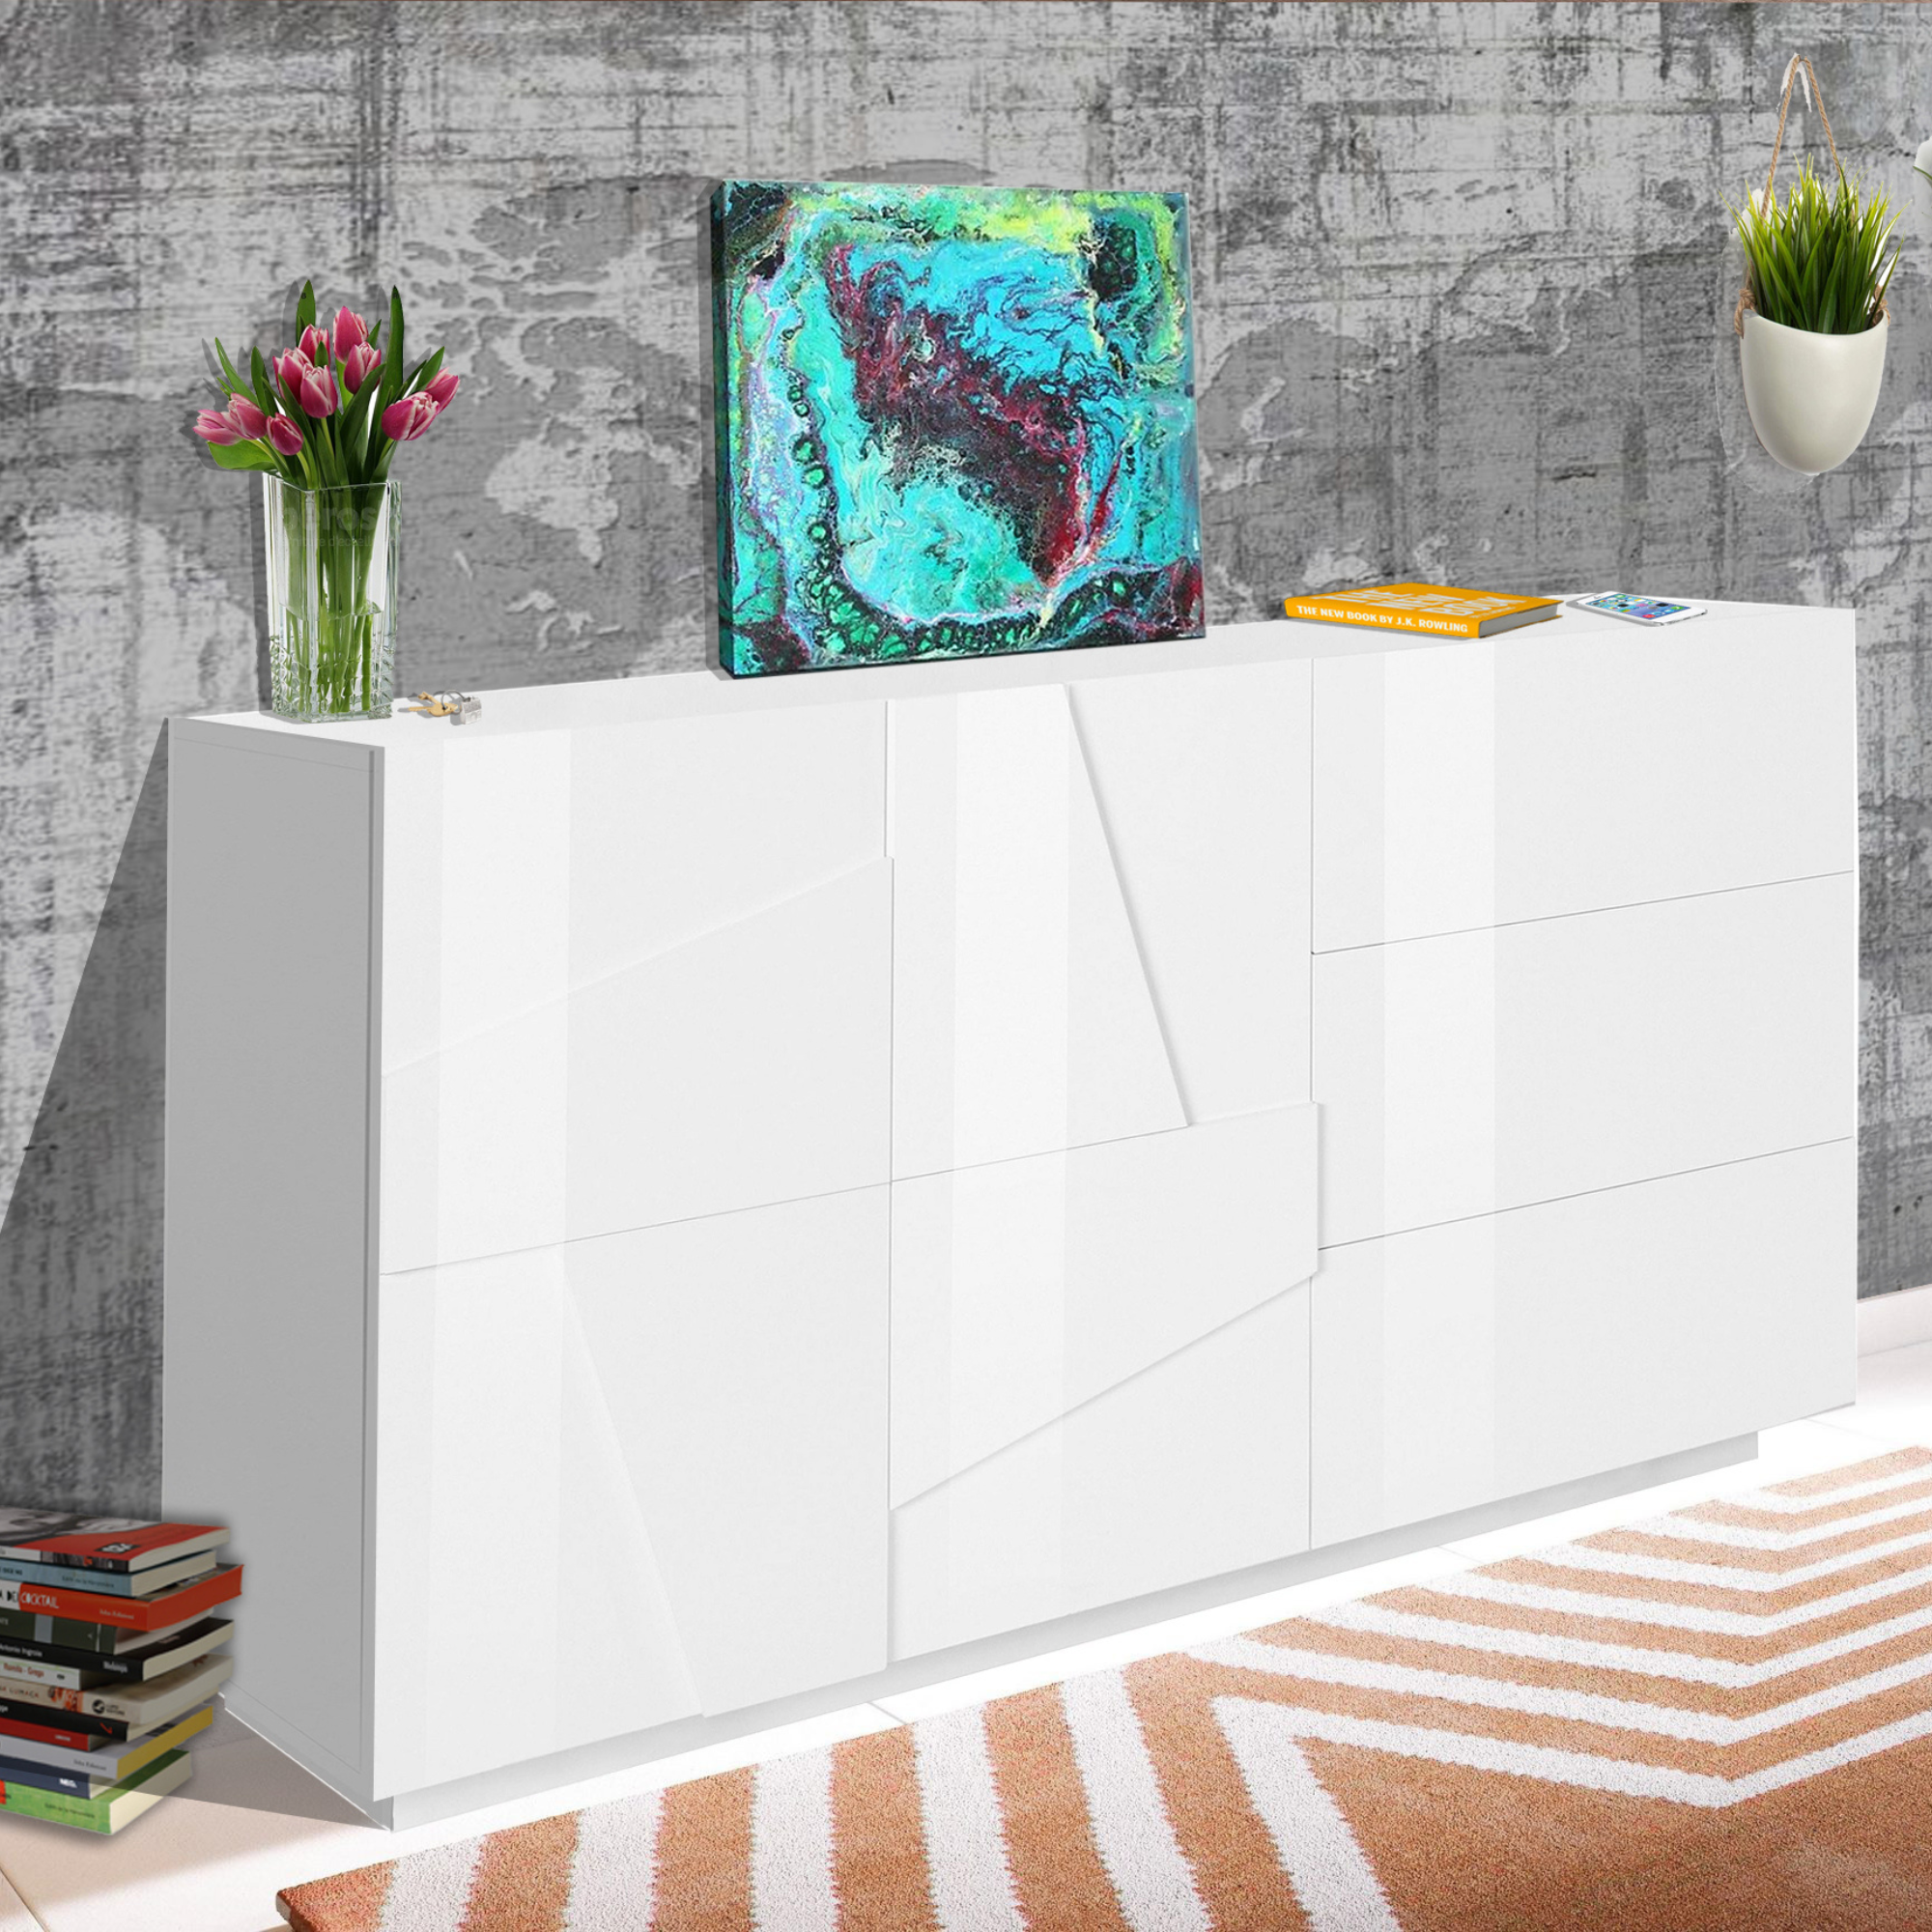 PING Sideboard with 2 Doors and 3 Drawers - Furniture.Agency